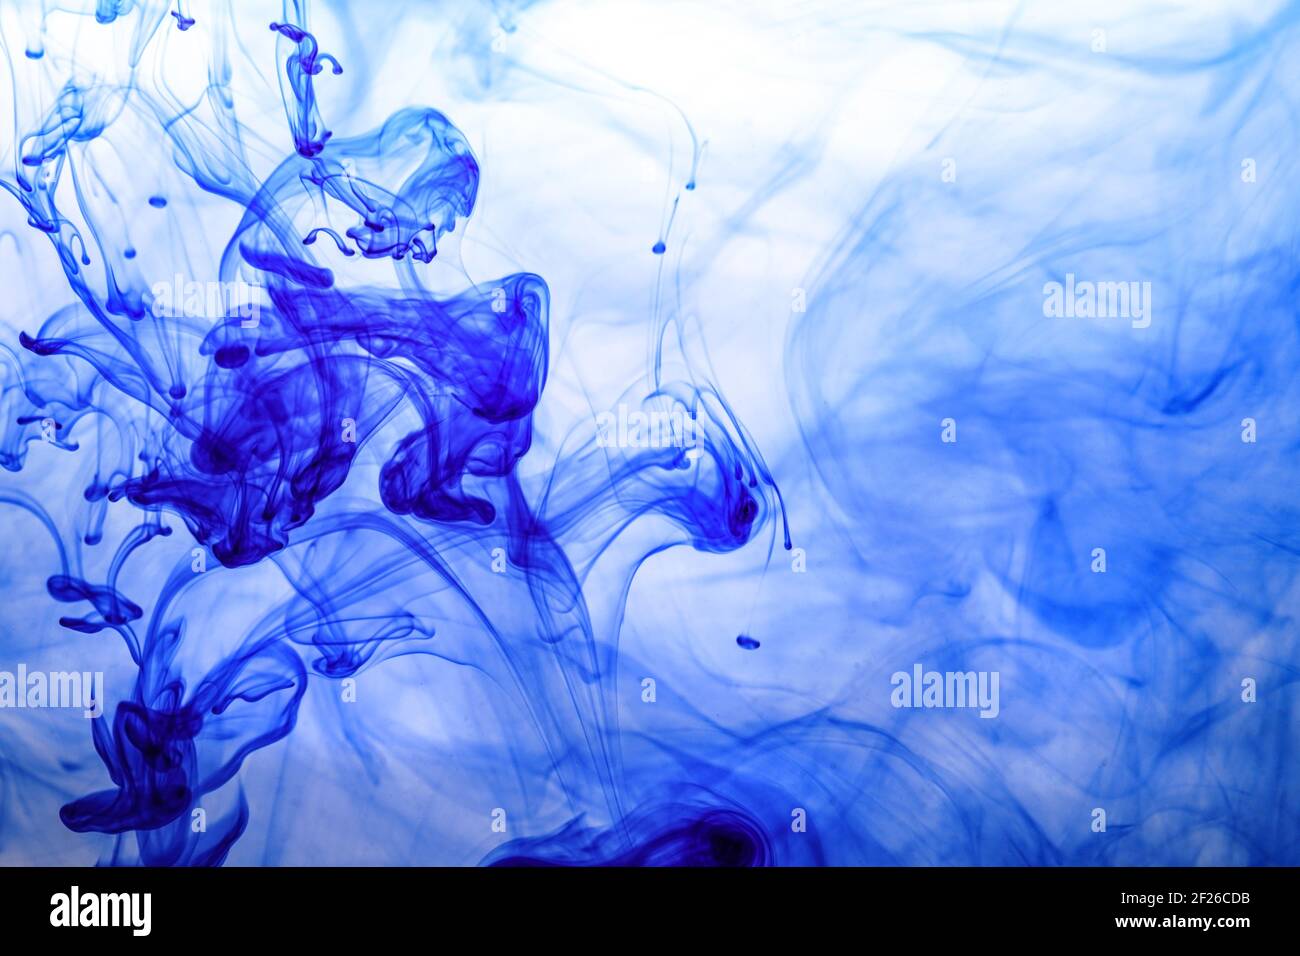 Blue ink injected into water from syringe, colour mixing with water ...